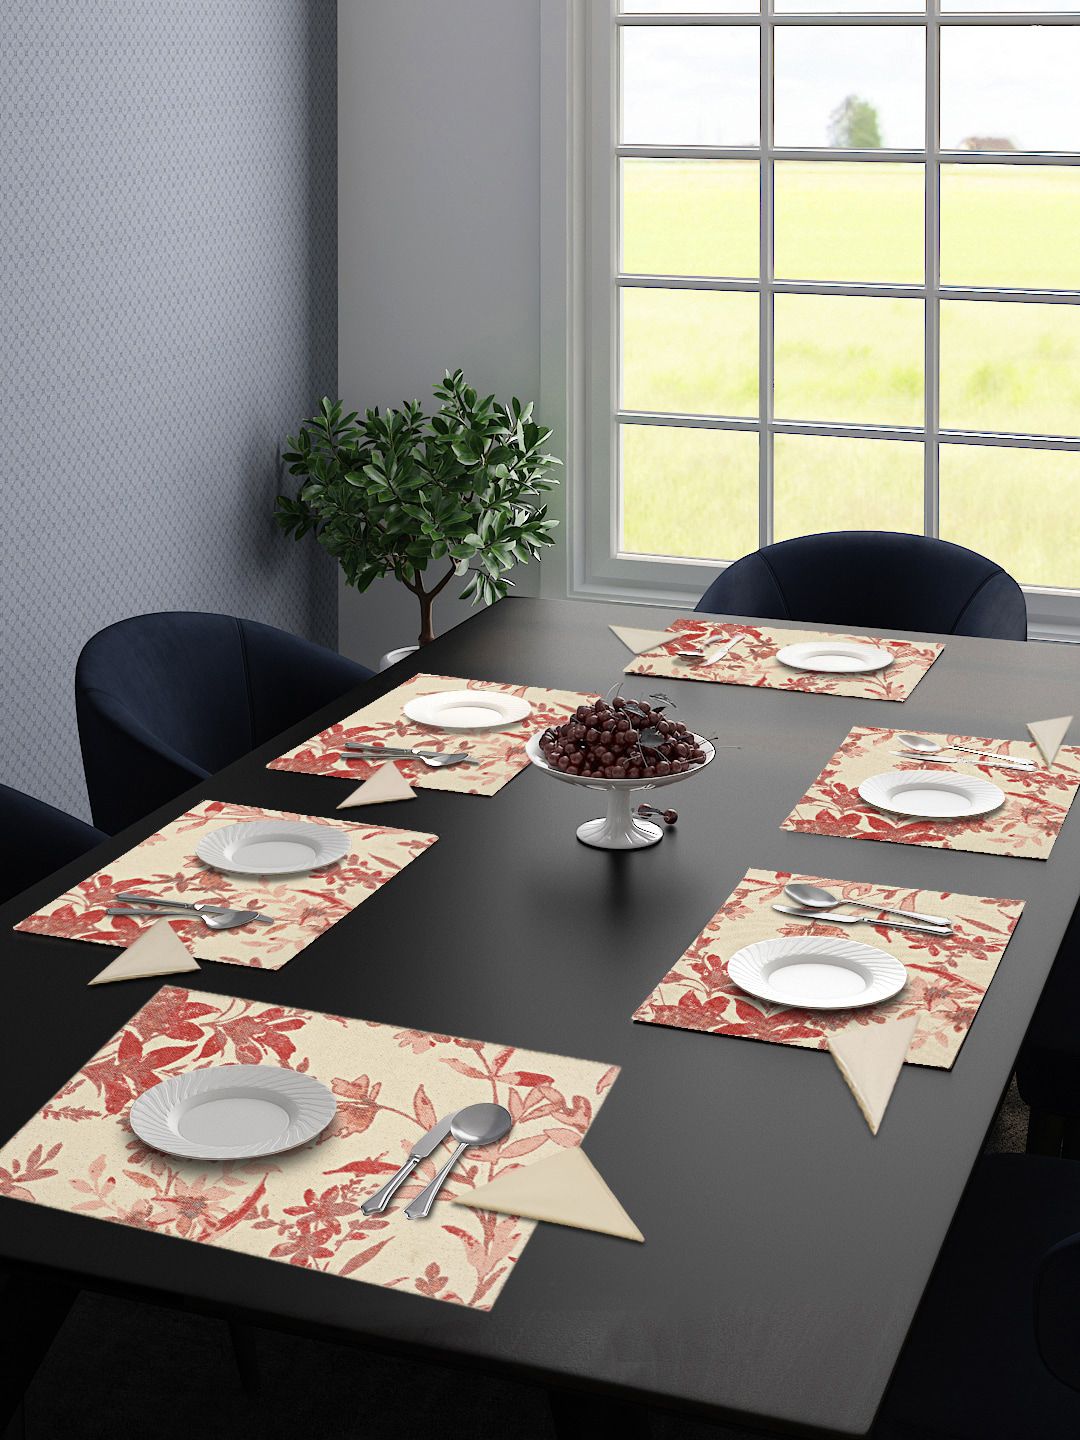 Saral Home Set of 6 Red & Beige Printed Table Placemats Price in India